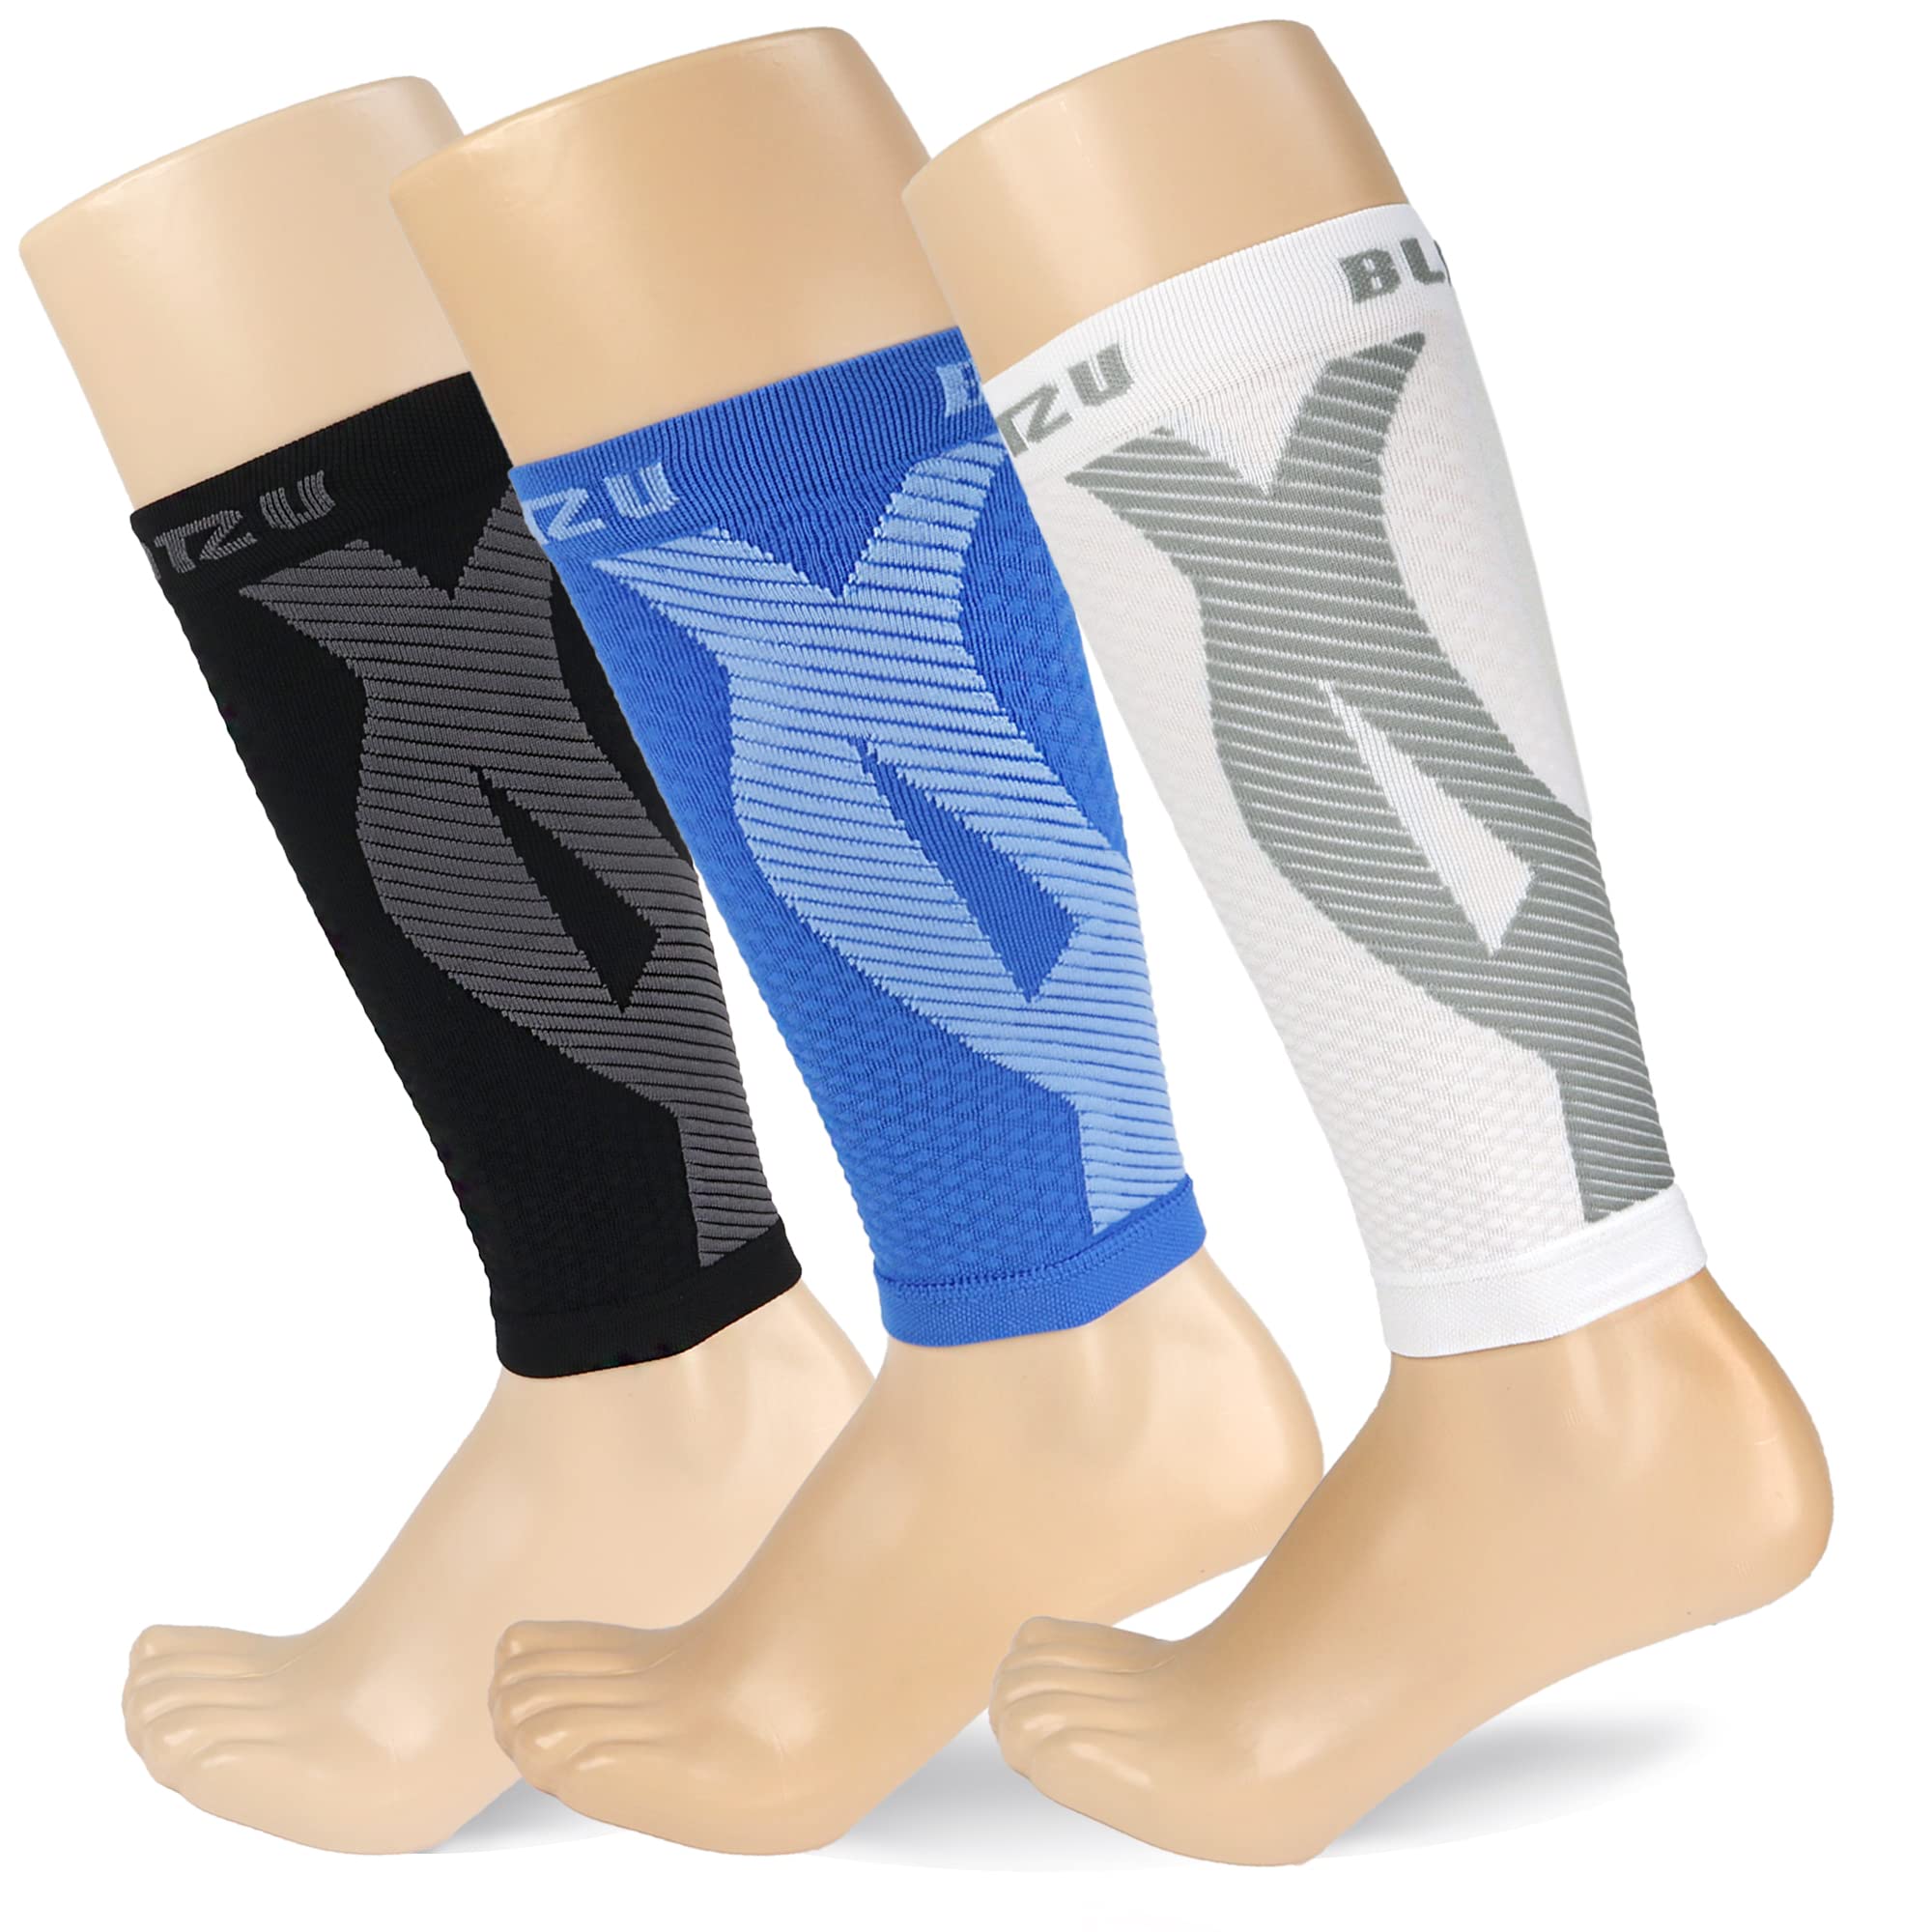 BLITZU 3 Pairs Calf Compression Sleeves for Women and Men Size L